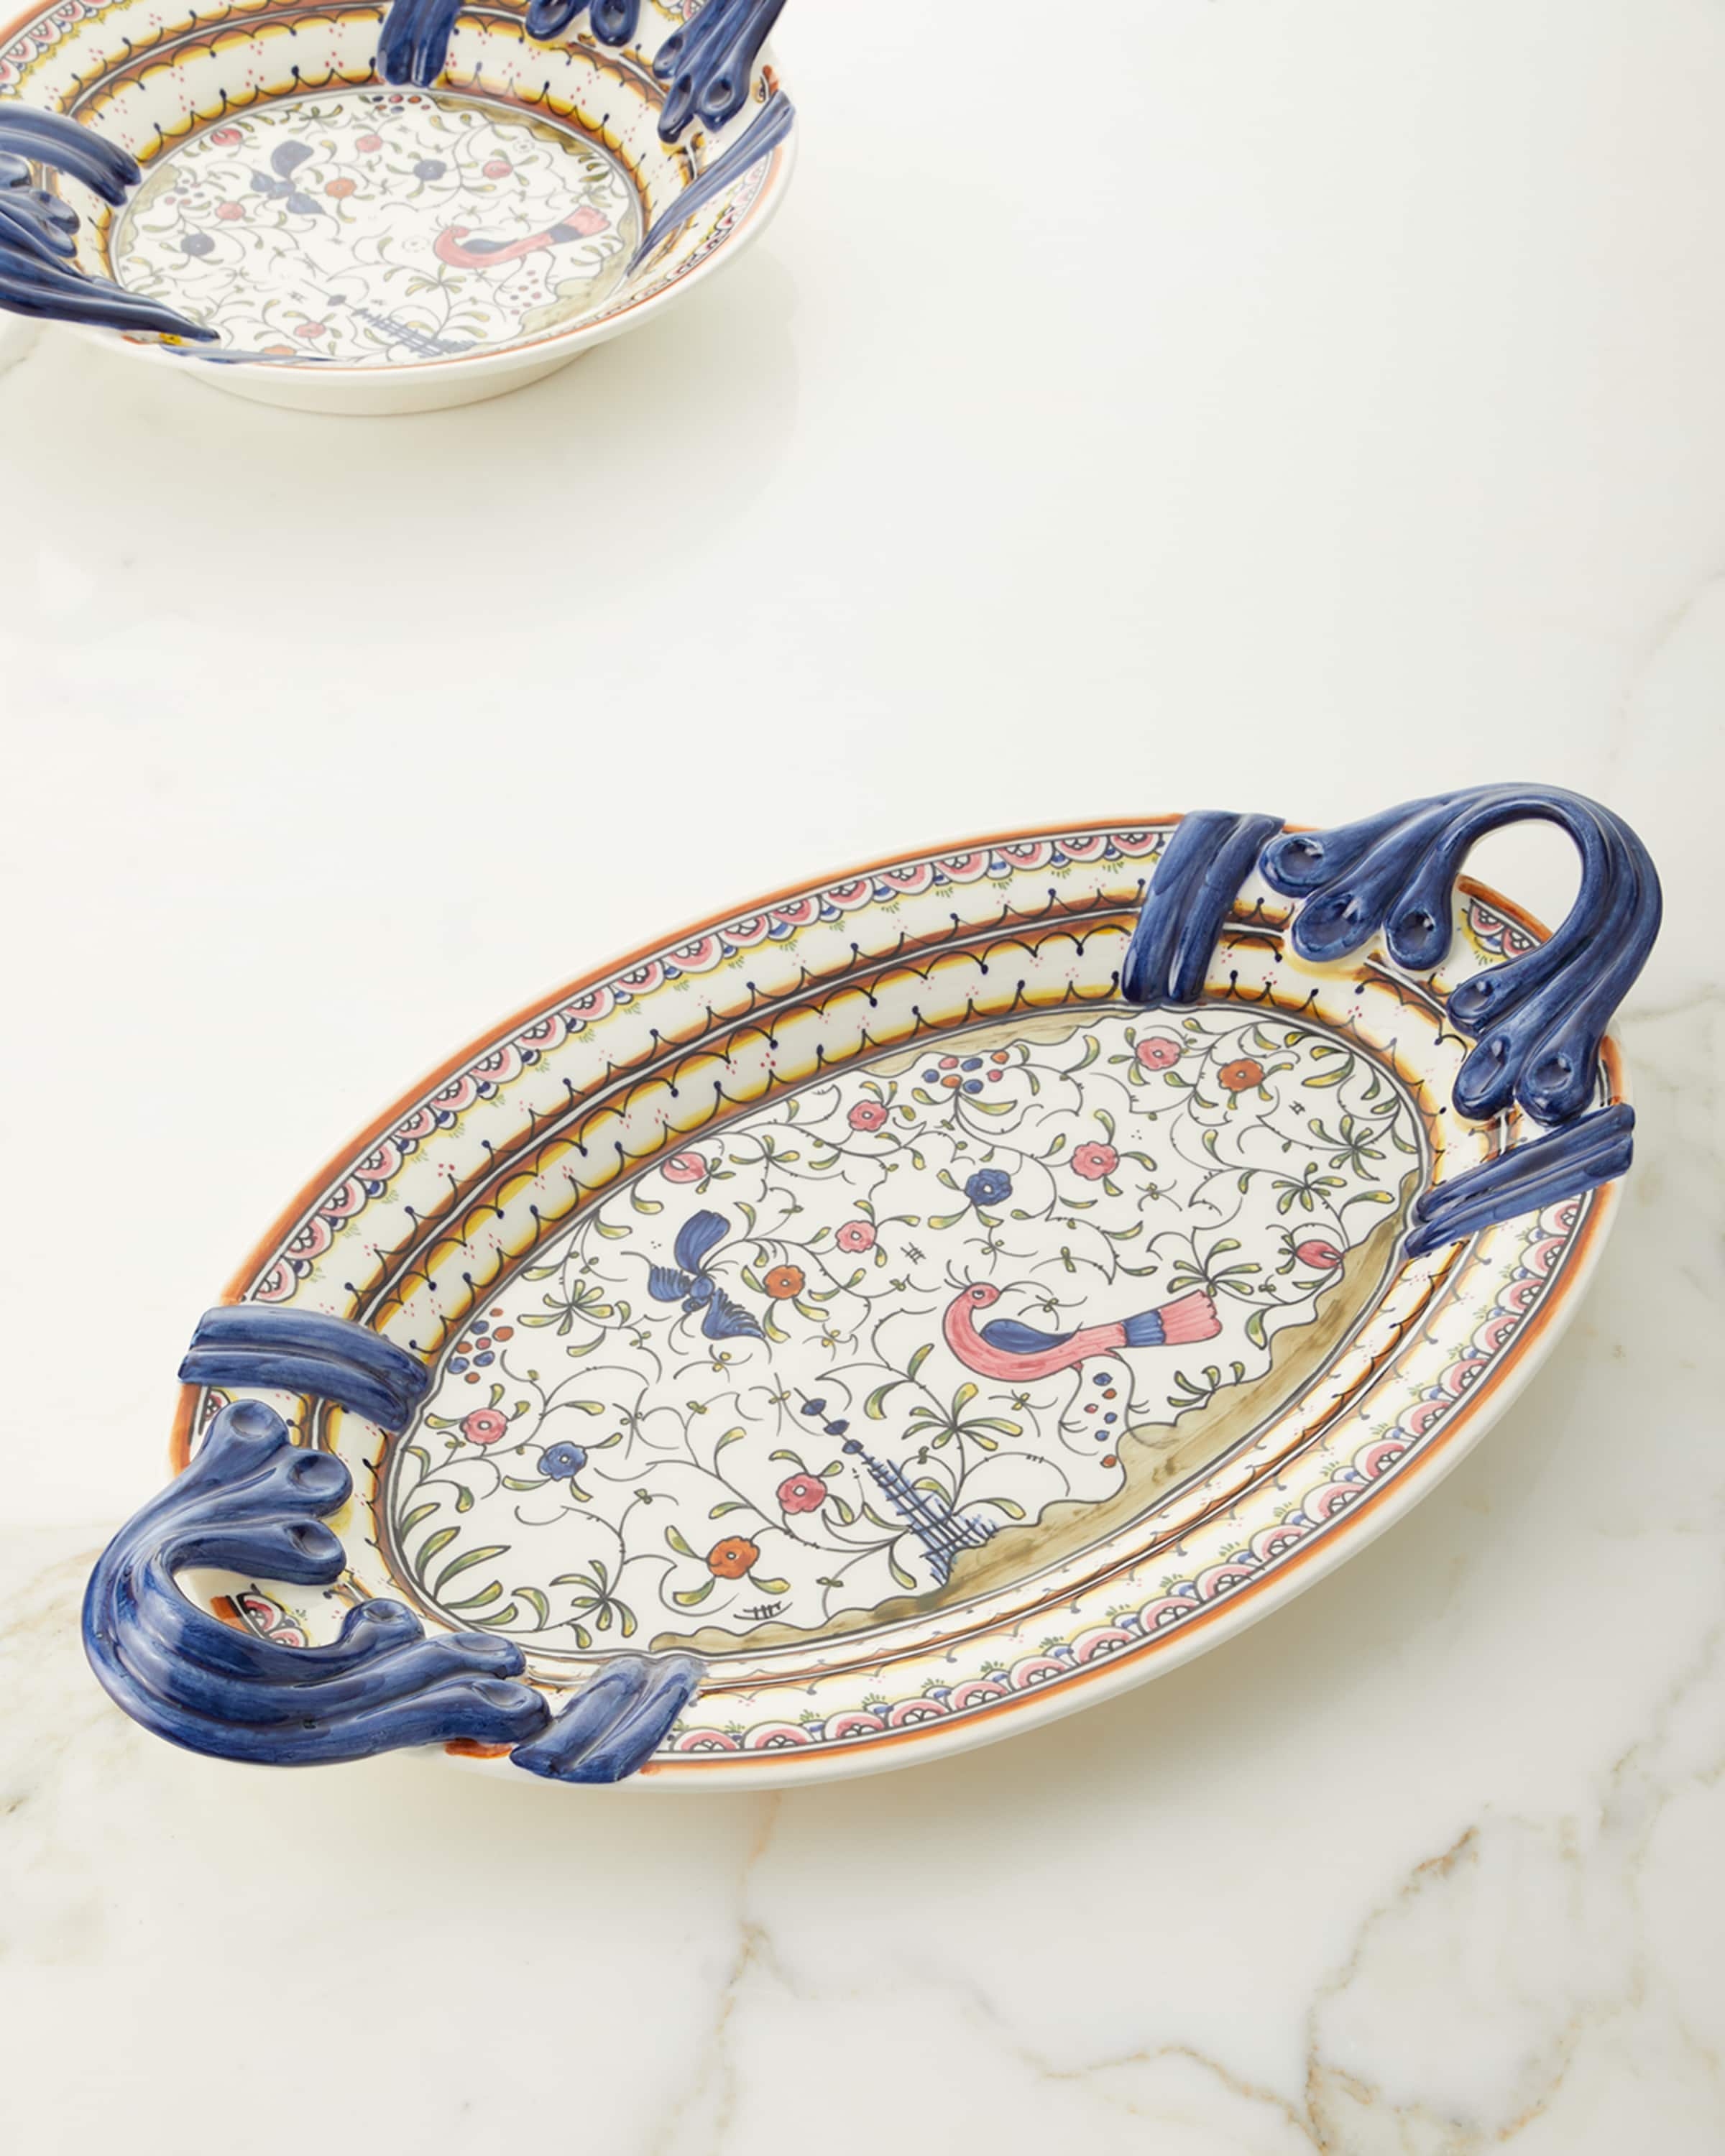 Neiman Marcus Pavoes Handled Oval Platter